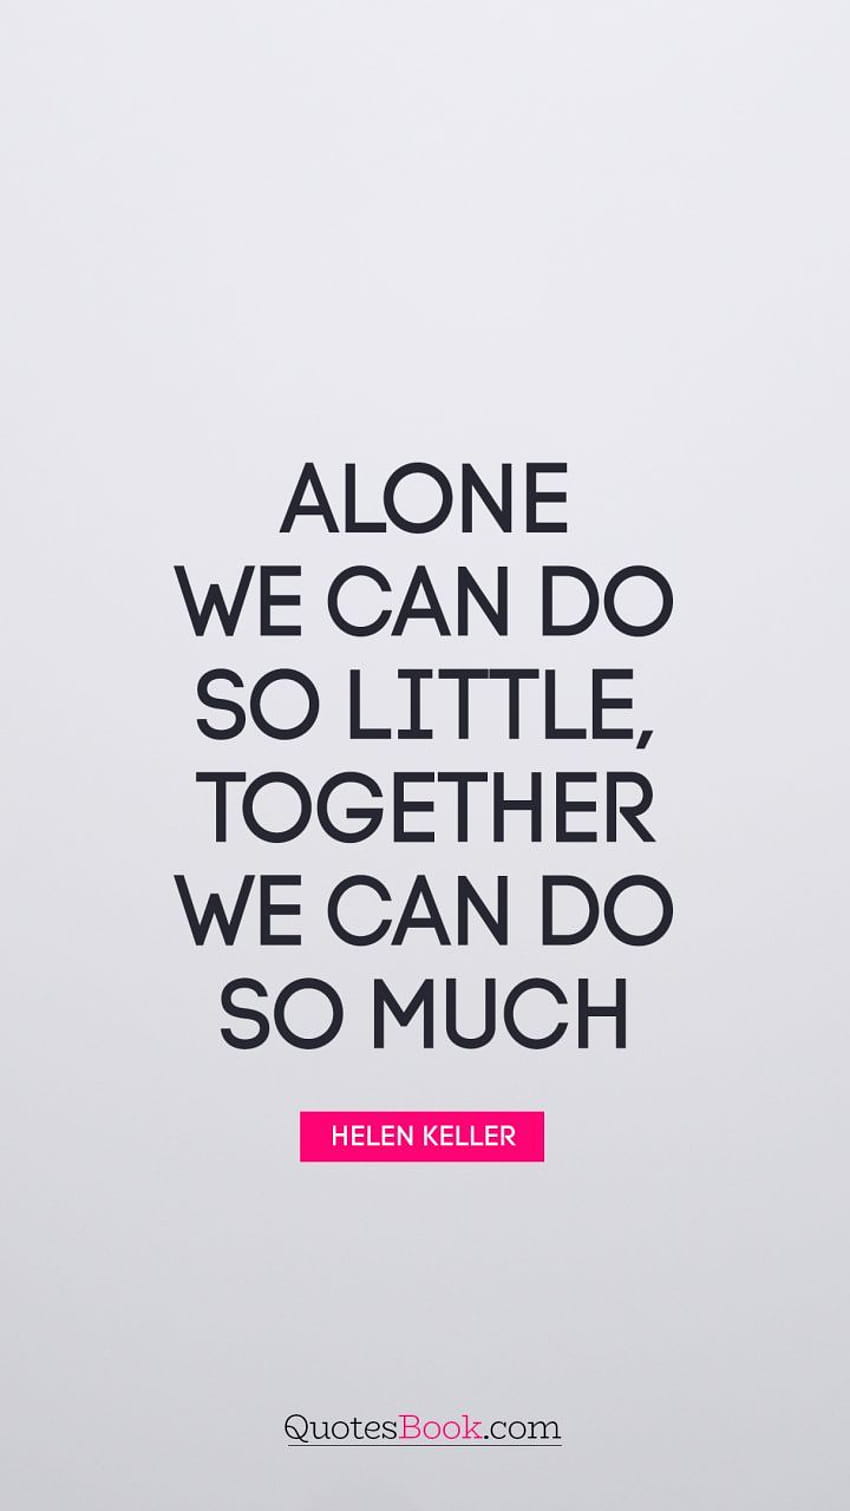 Quotes ~ Helen Keller Quote E2809calone We Can Do So Little Together Much Quotefancy Alone 41 Alone We Can Do So Little Helen Keller Inspirations wallpaper ponsel HD